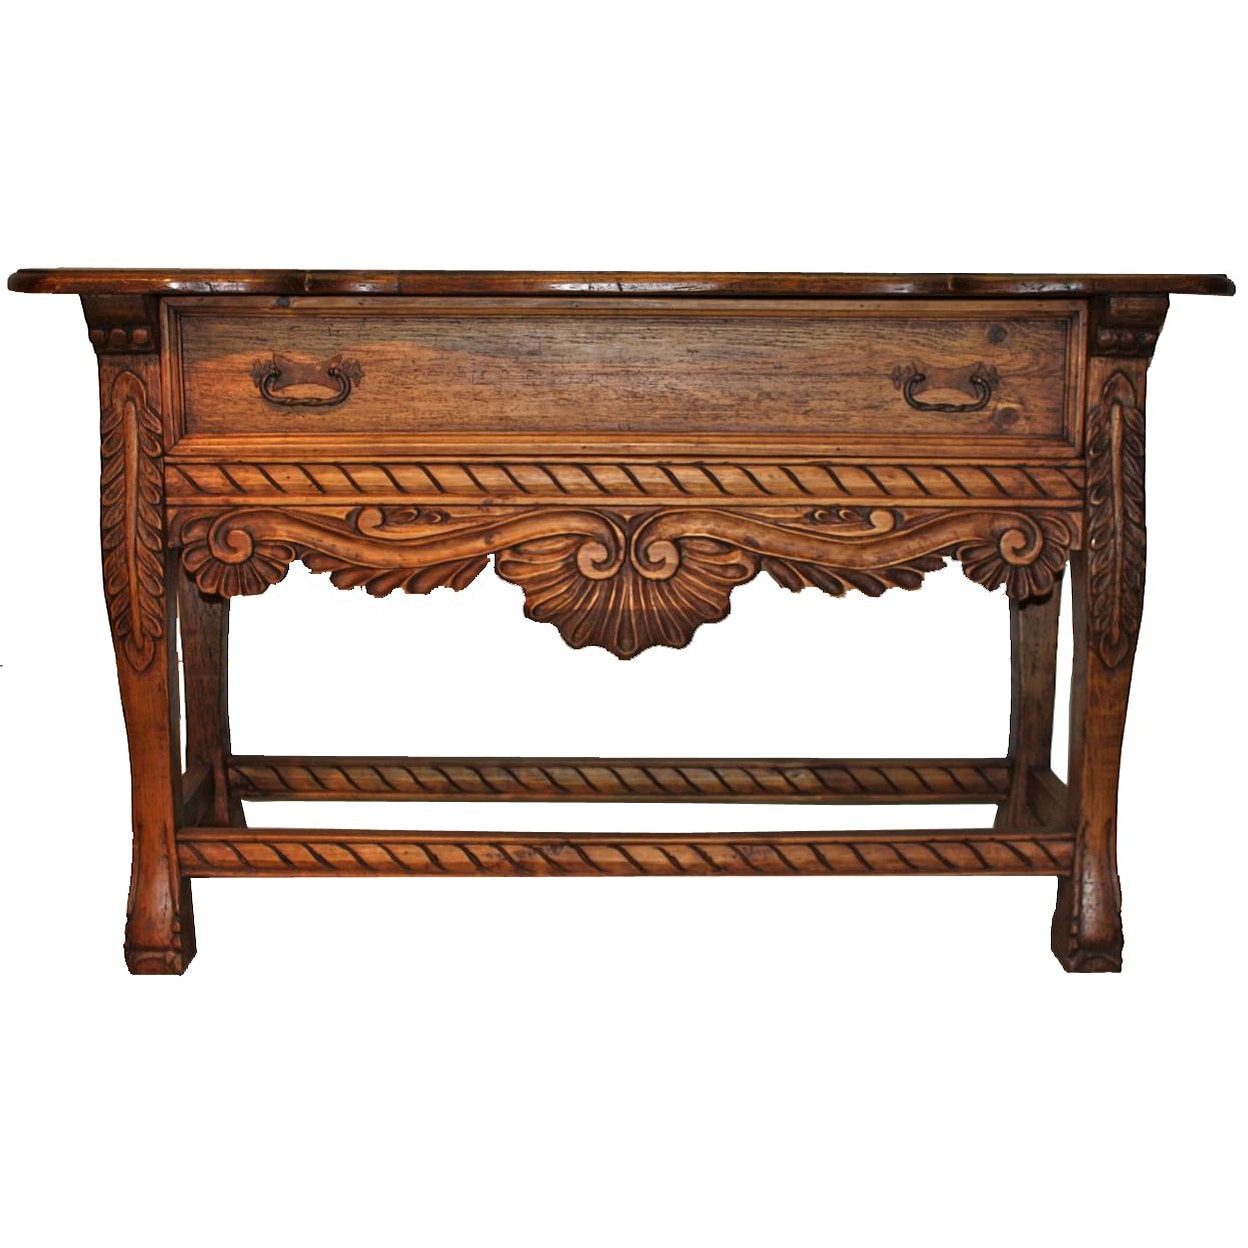 Furniture Source International Occasional Tables Console Table